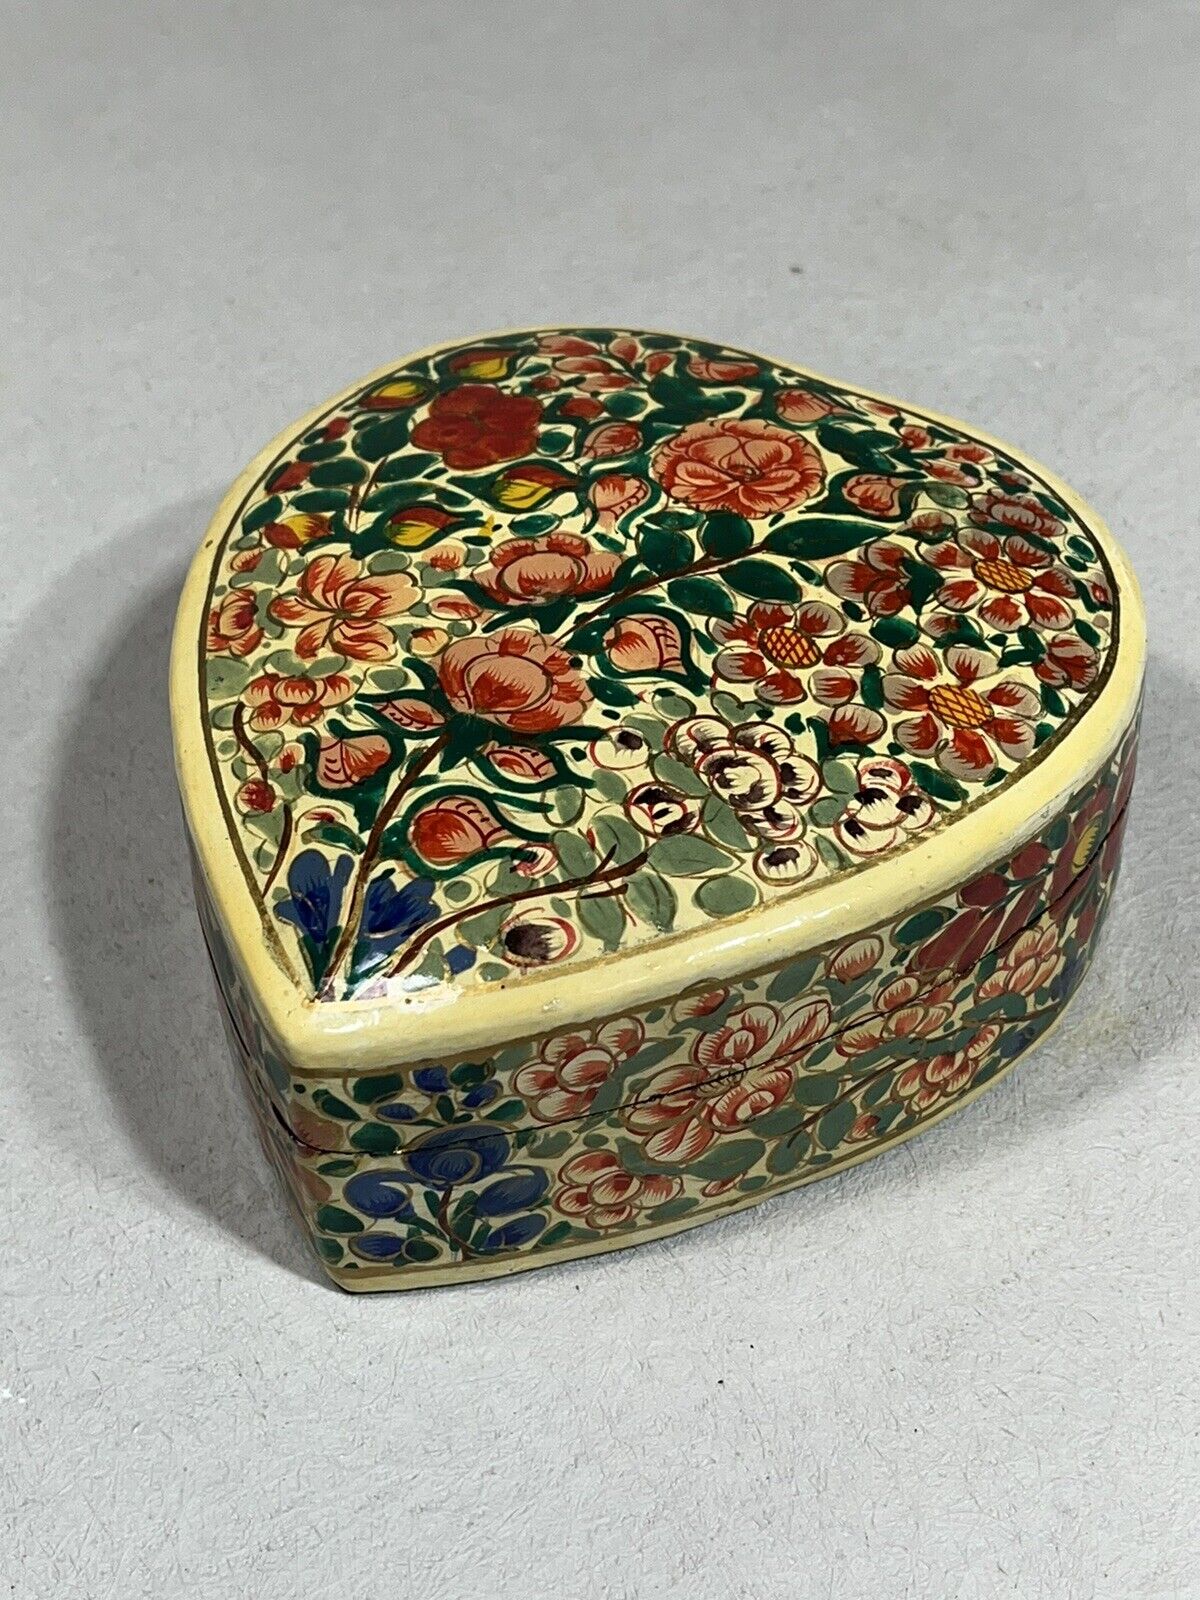 Vintage Lacquered Heart Shaped Trinket Box With Hand Painted Floral Design.